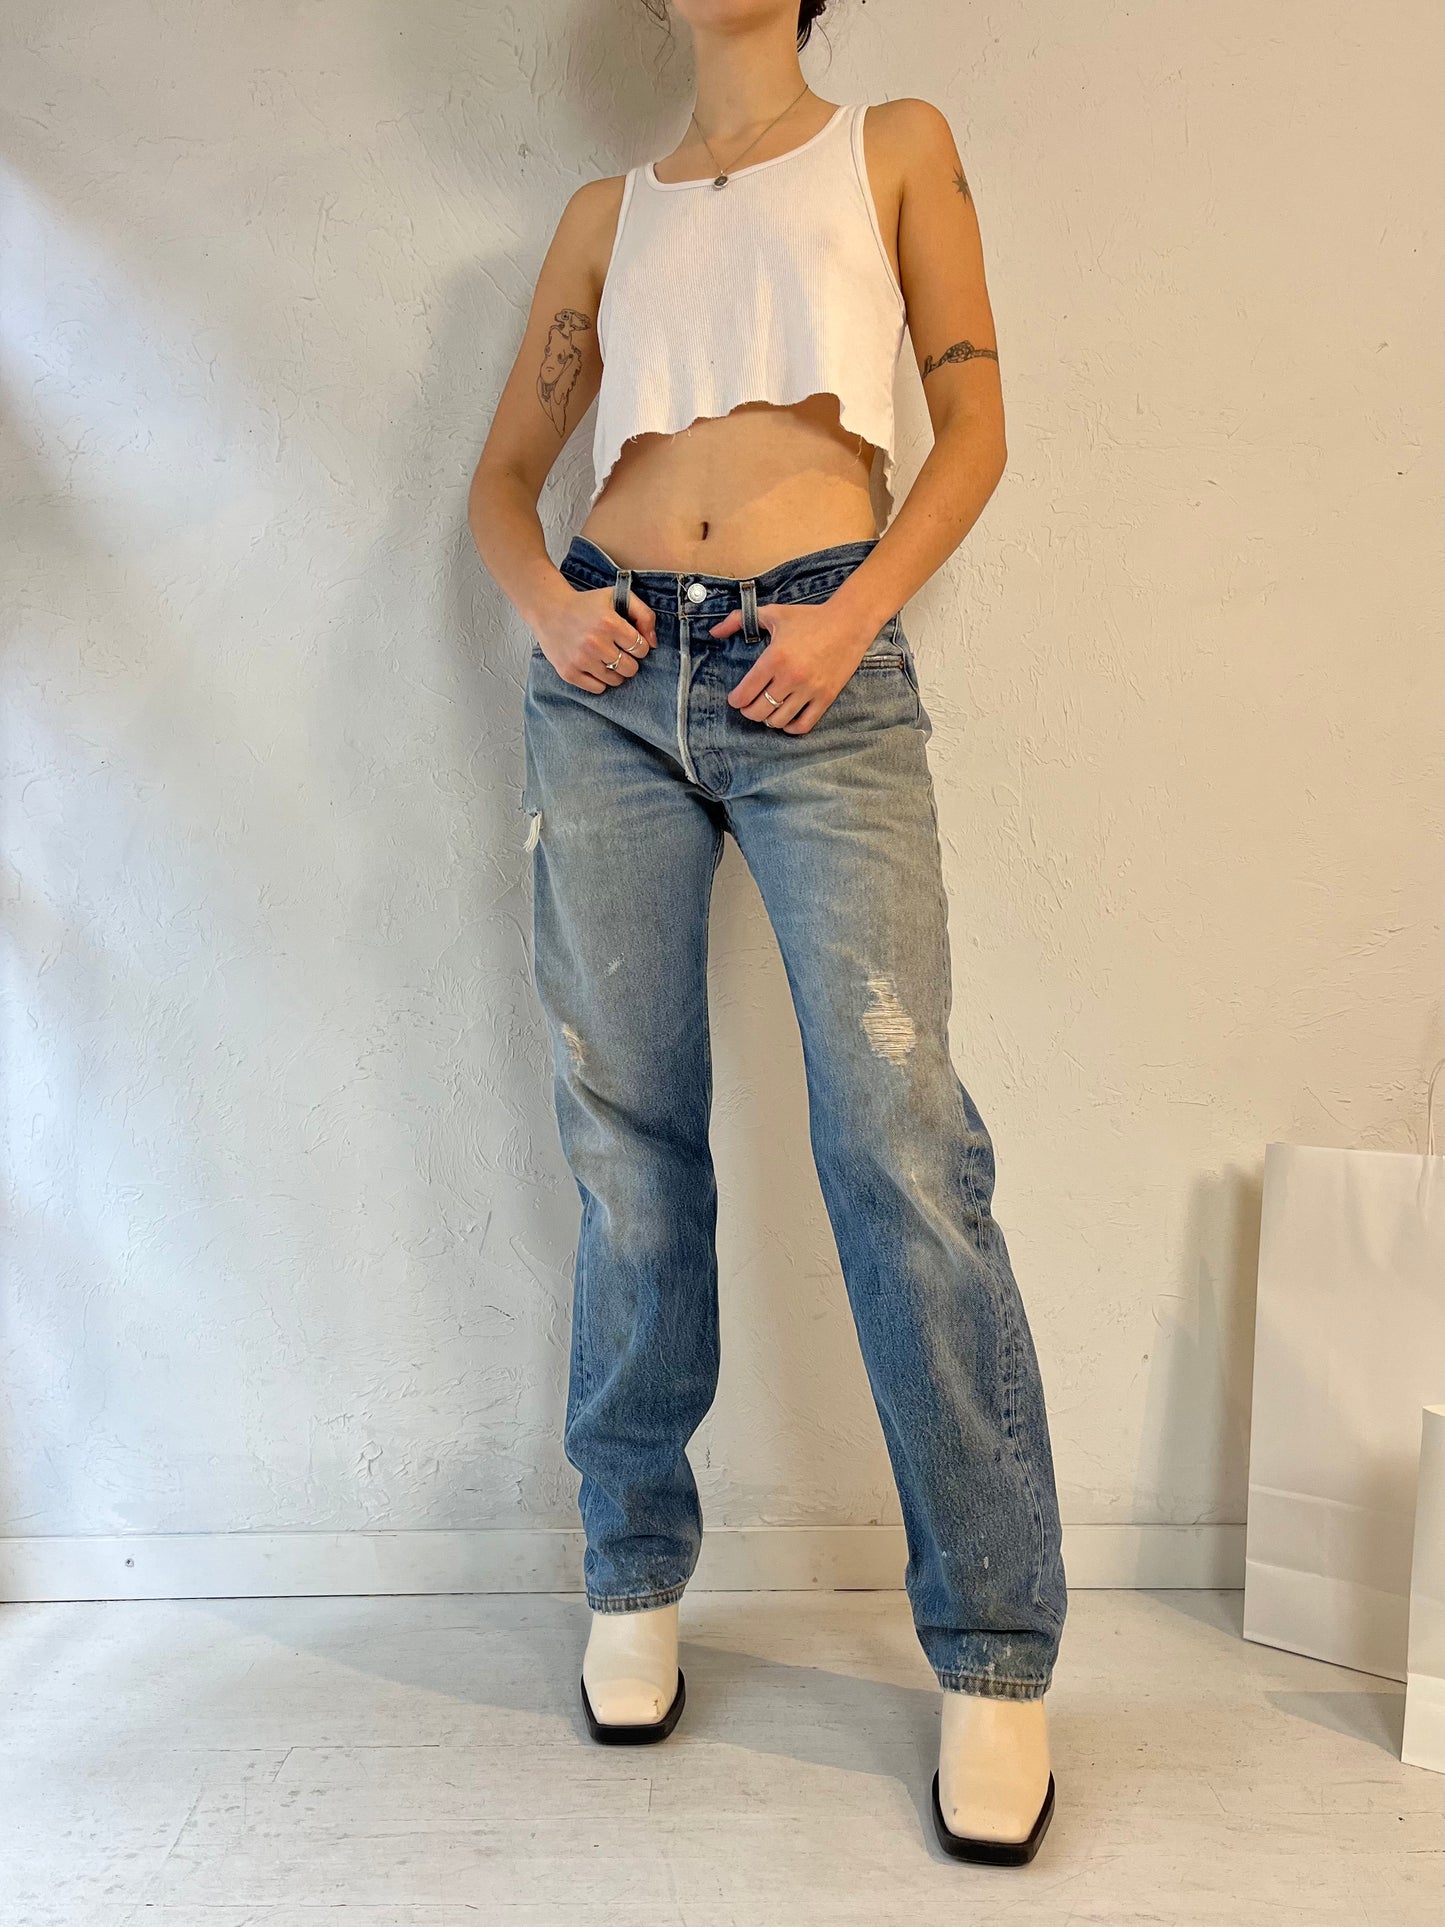 90s 'Levis' 501s Jeans / Made in USA / 31